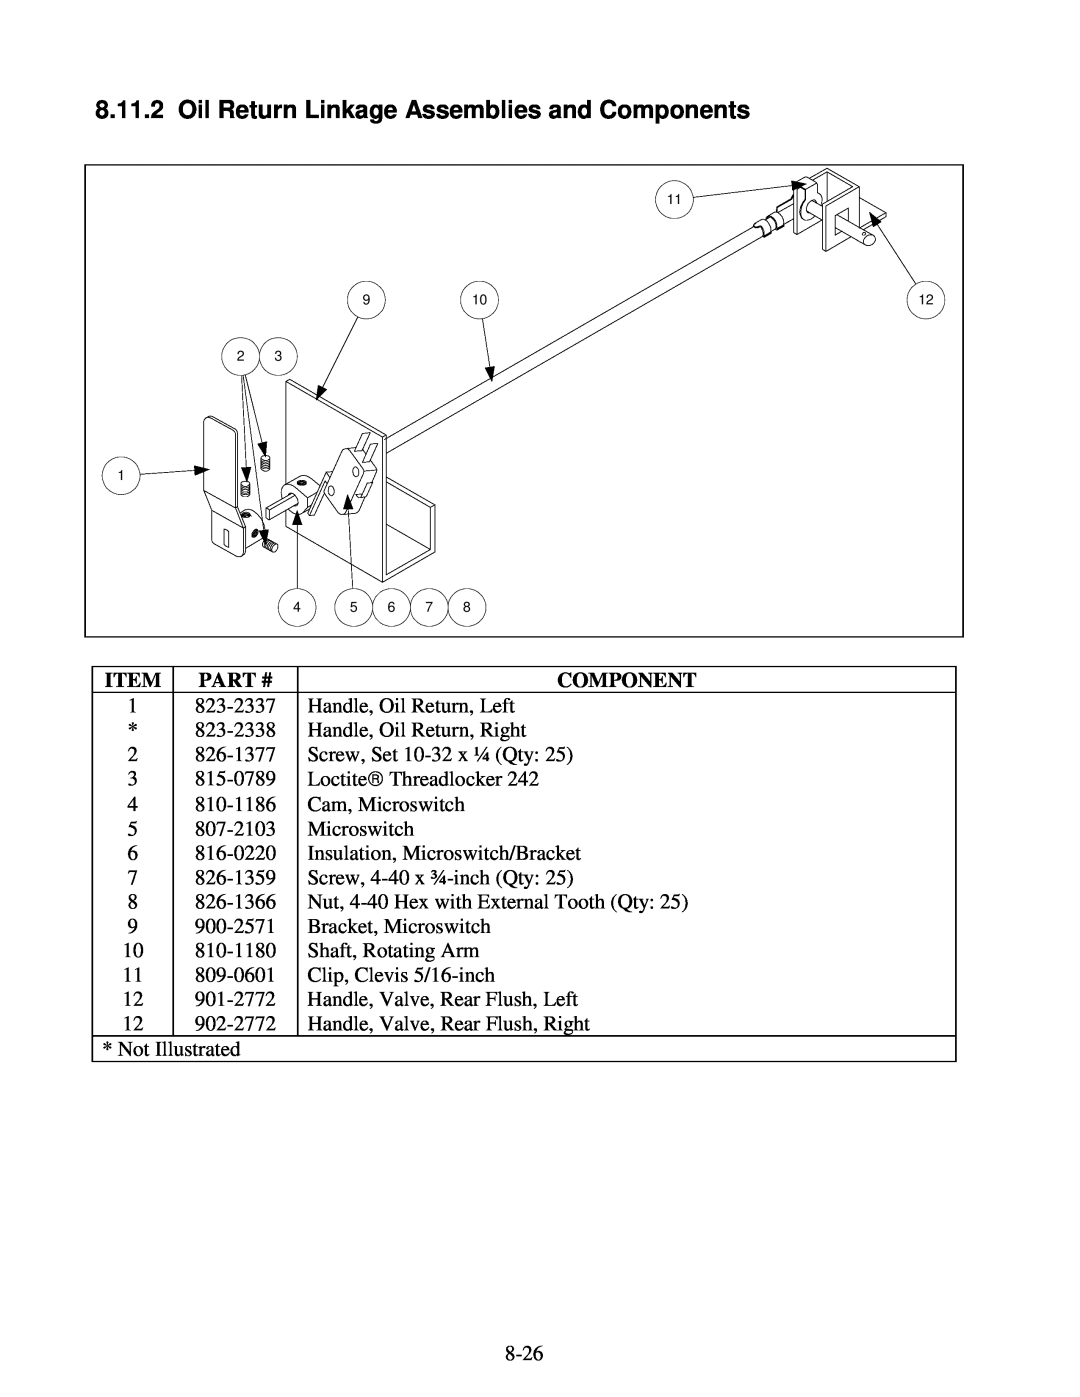 Frymaster H14 Series service manual Oil Return Linkage Assemblies and Components, Part # 